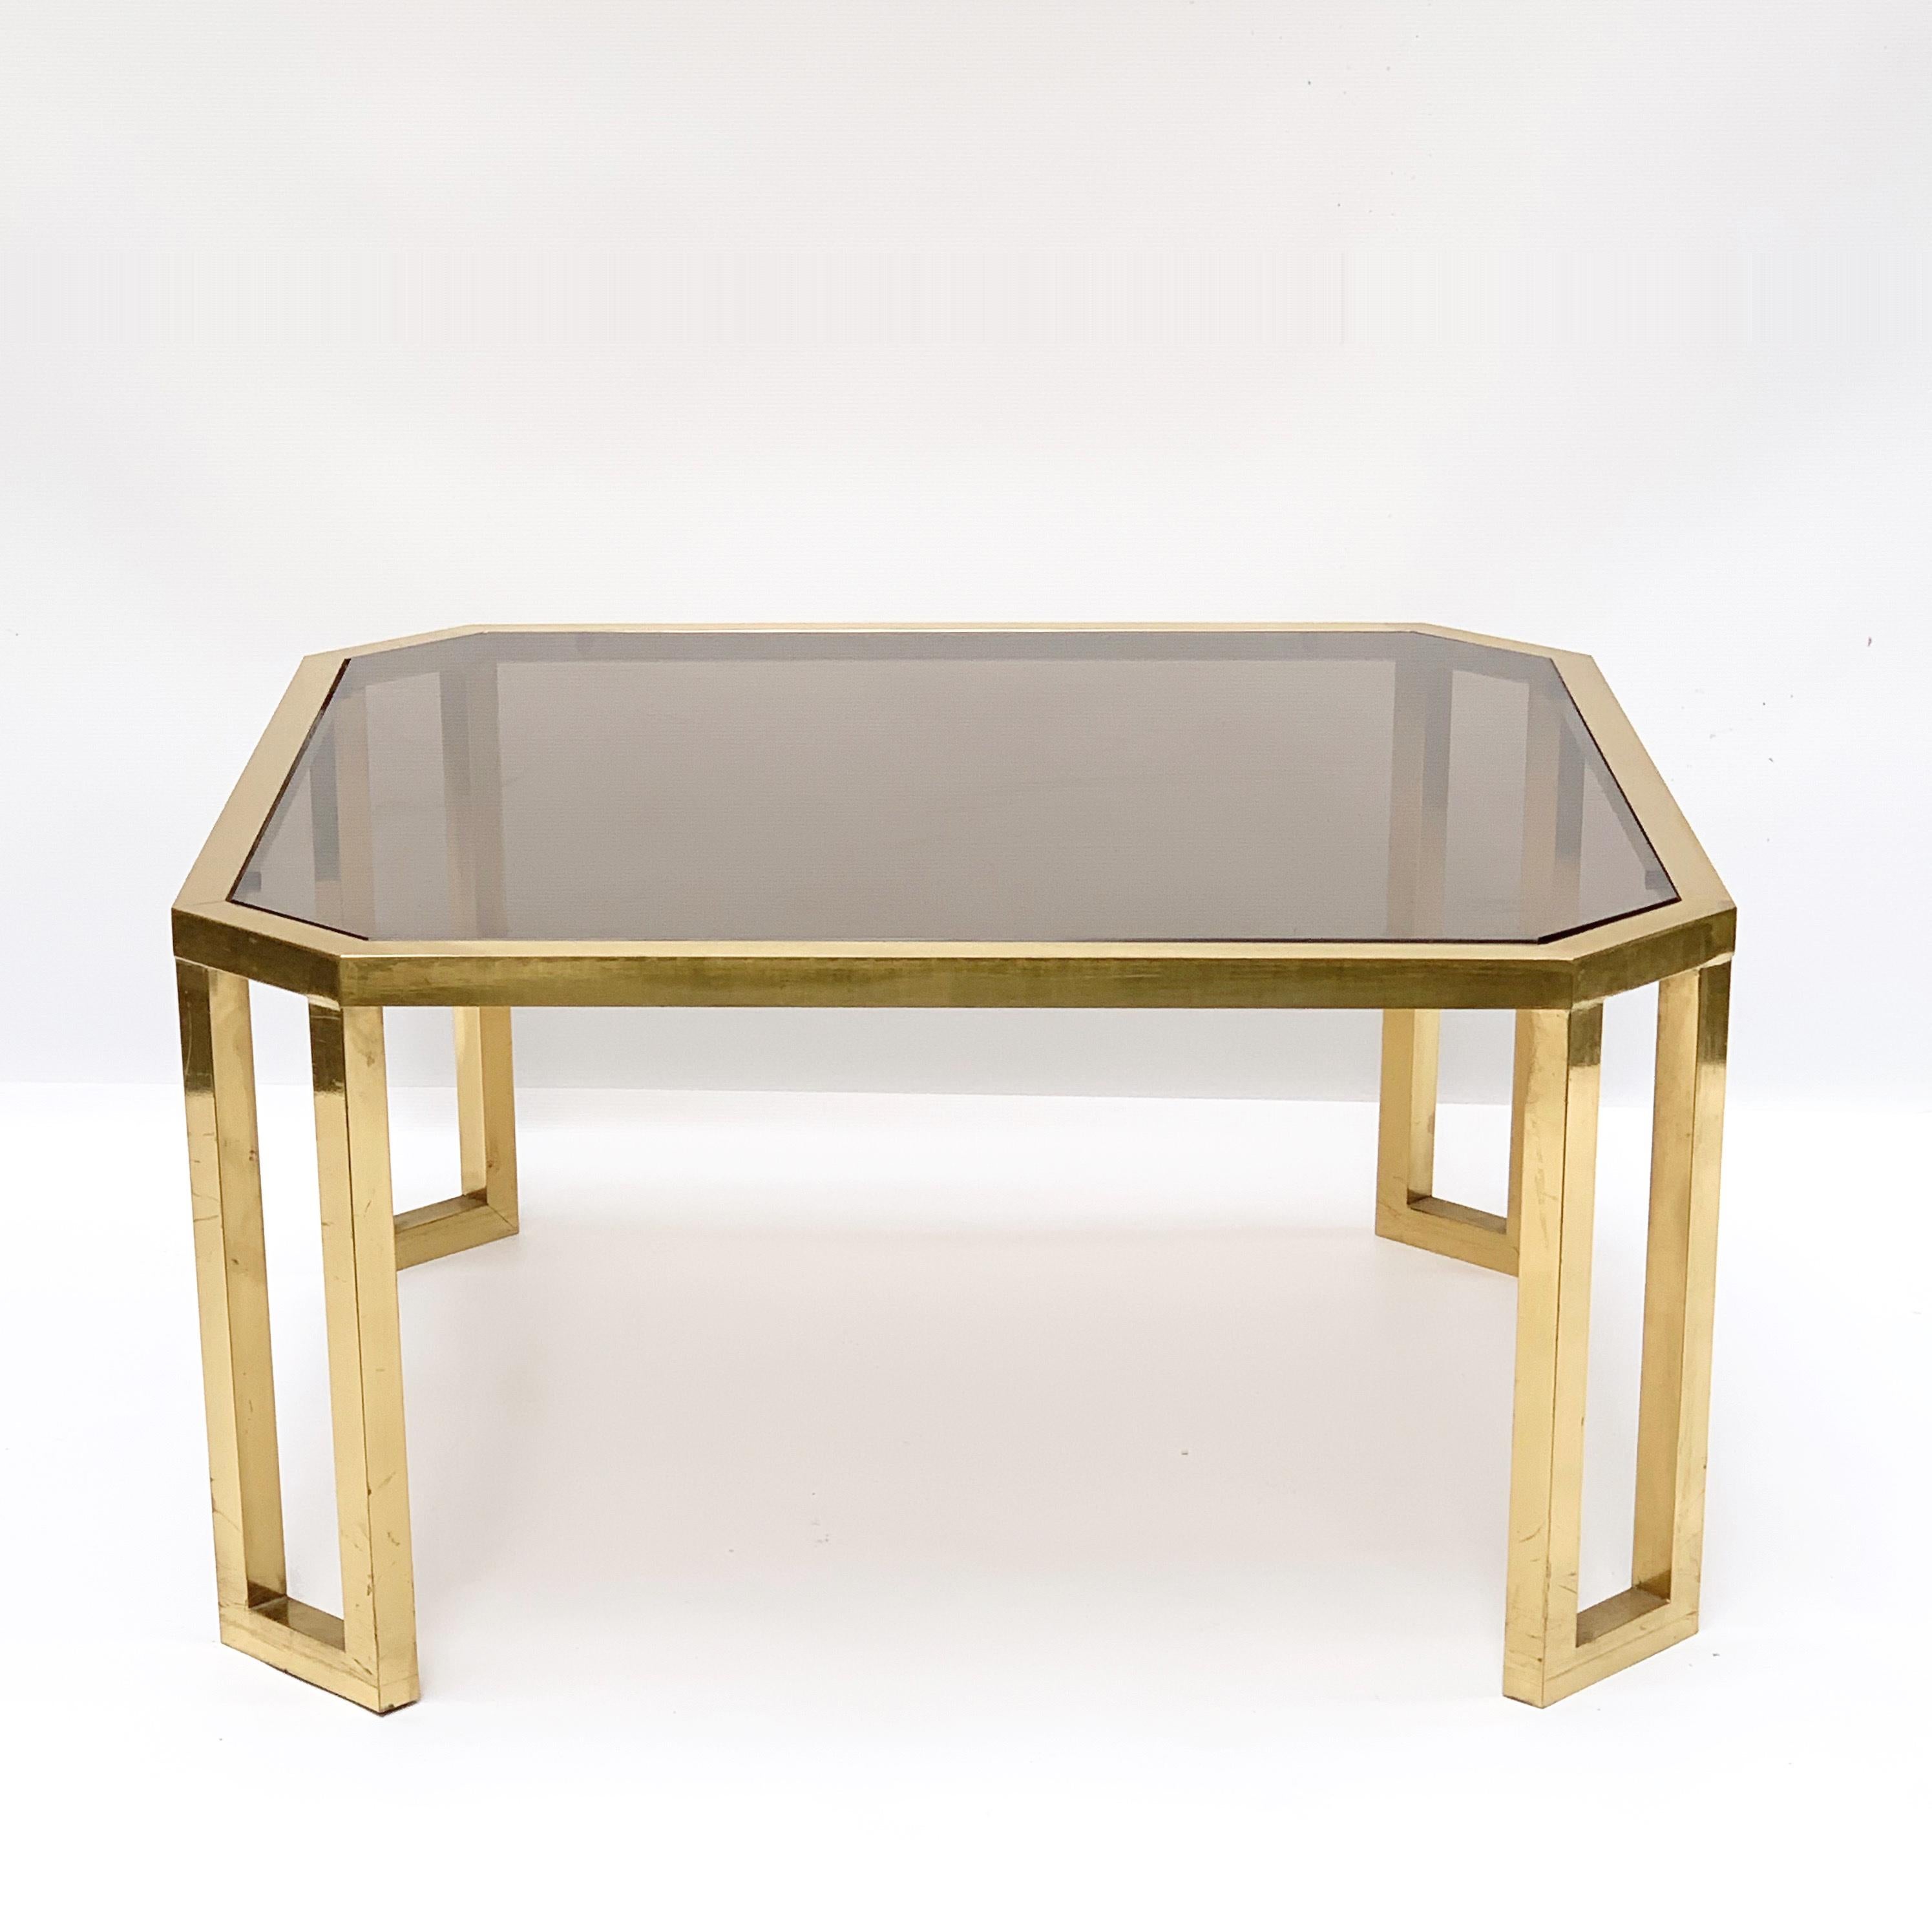 Maison Jansen Octagonal Tables in Brass and Glass, France, 1970s Coffee Tables For Sale 2